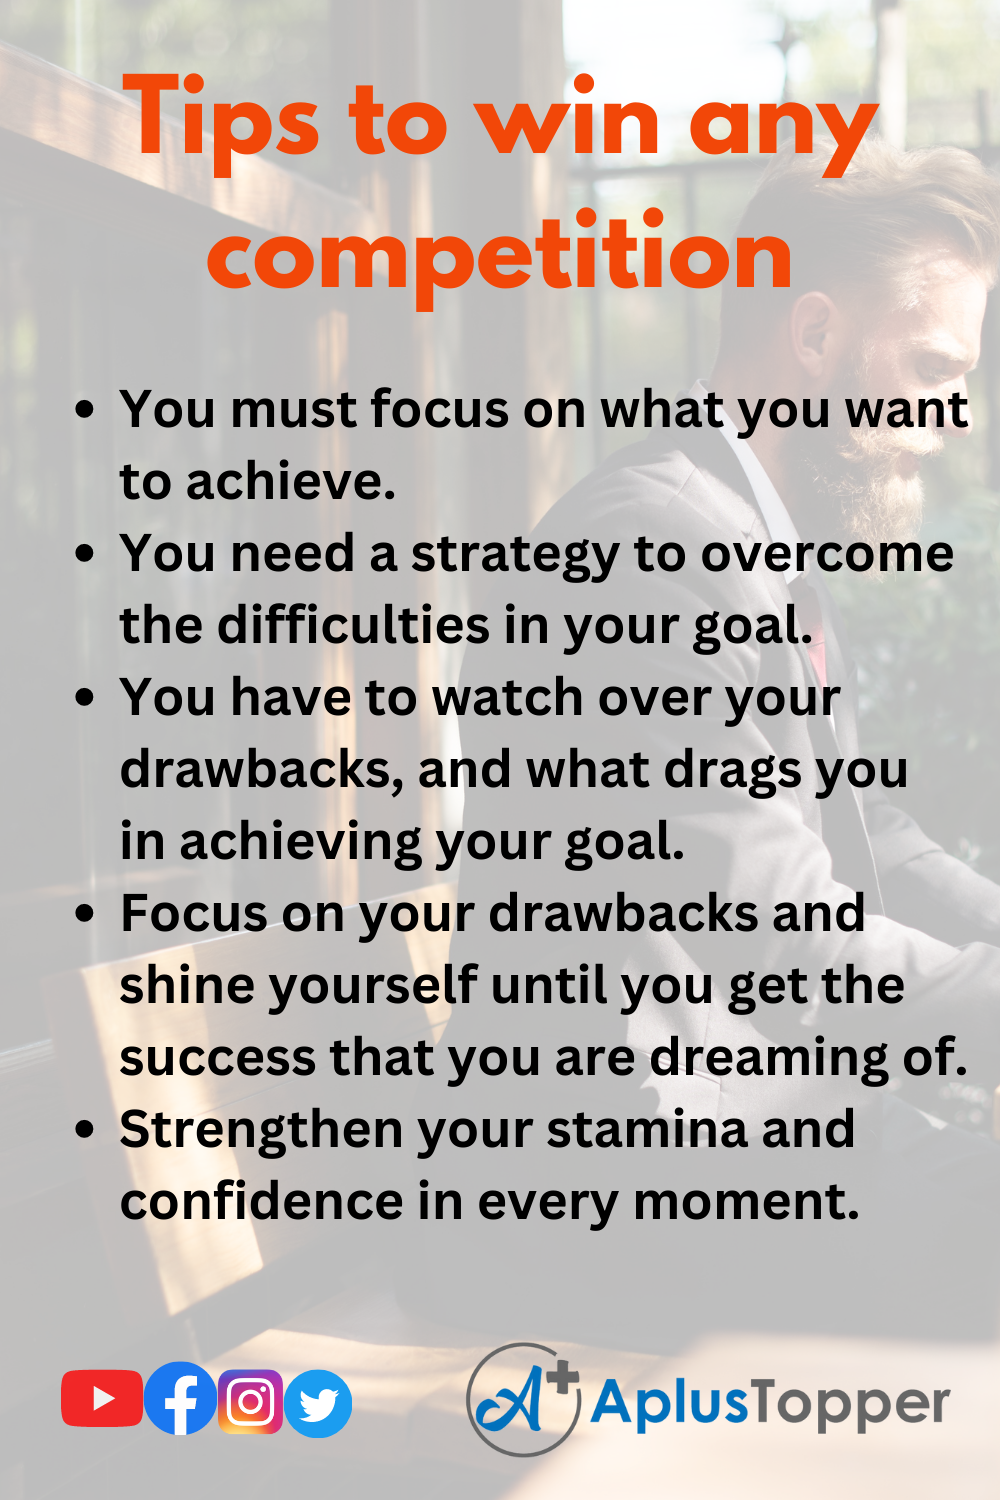 Tips to win any competition